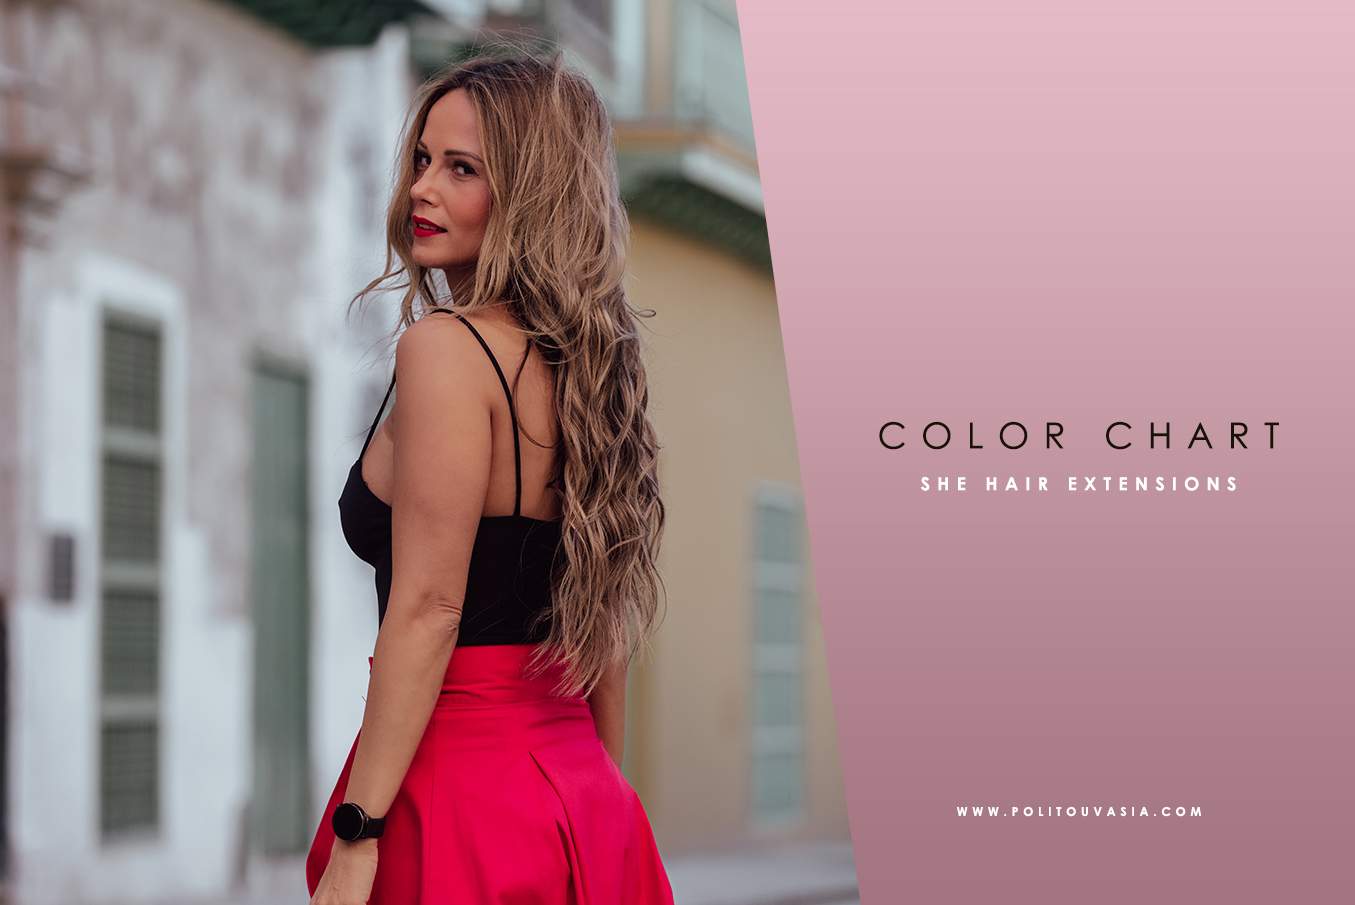 COLOR-CHART-She-Hair-Extensions-POLITOU-VASIA-